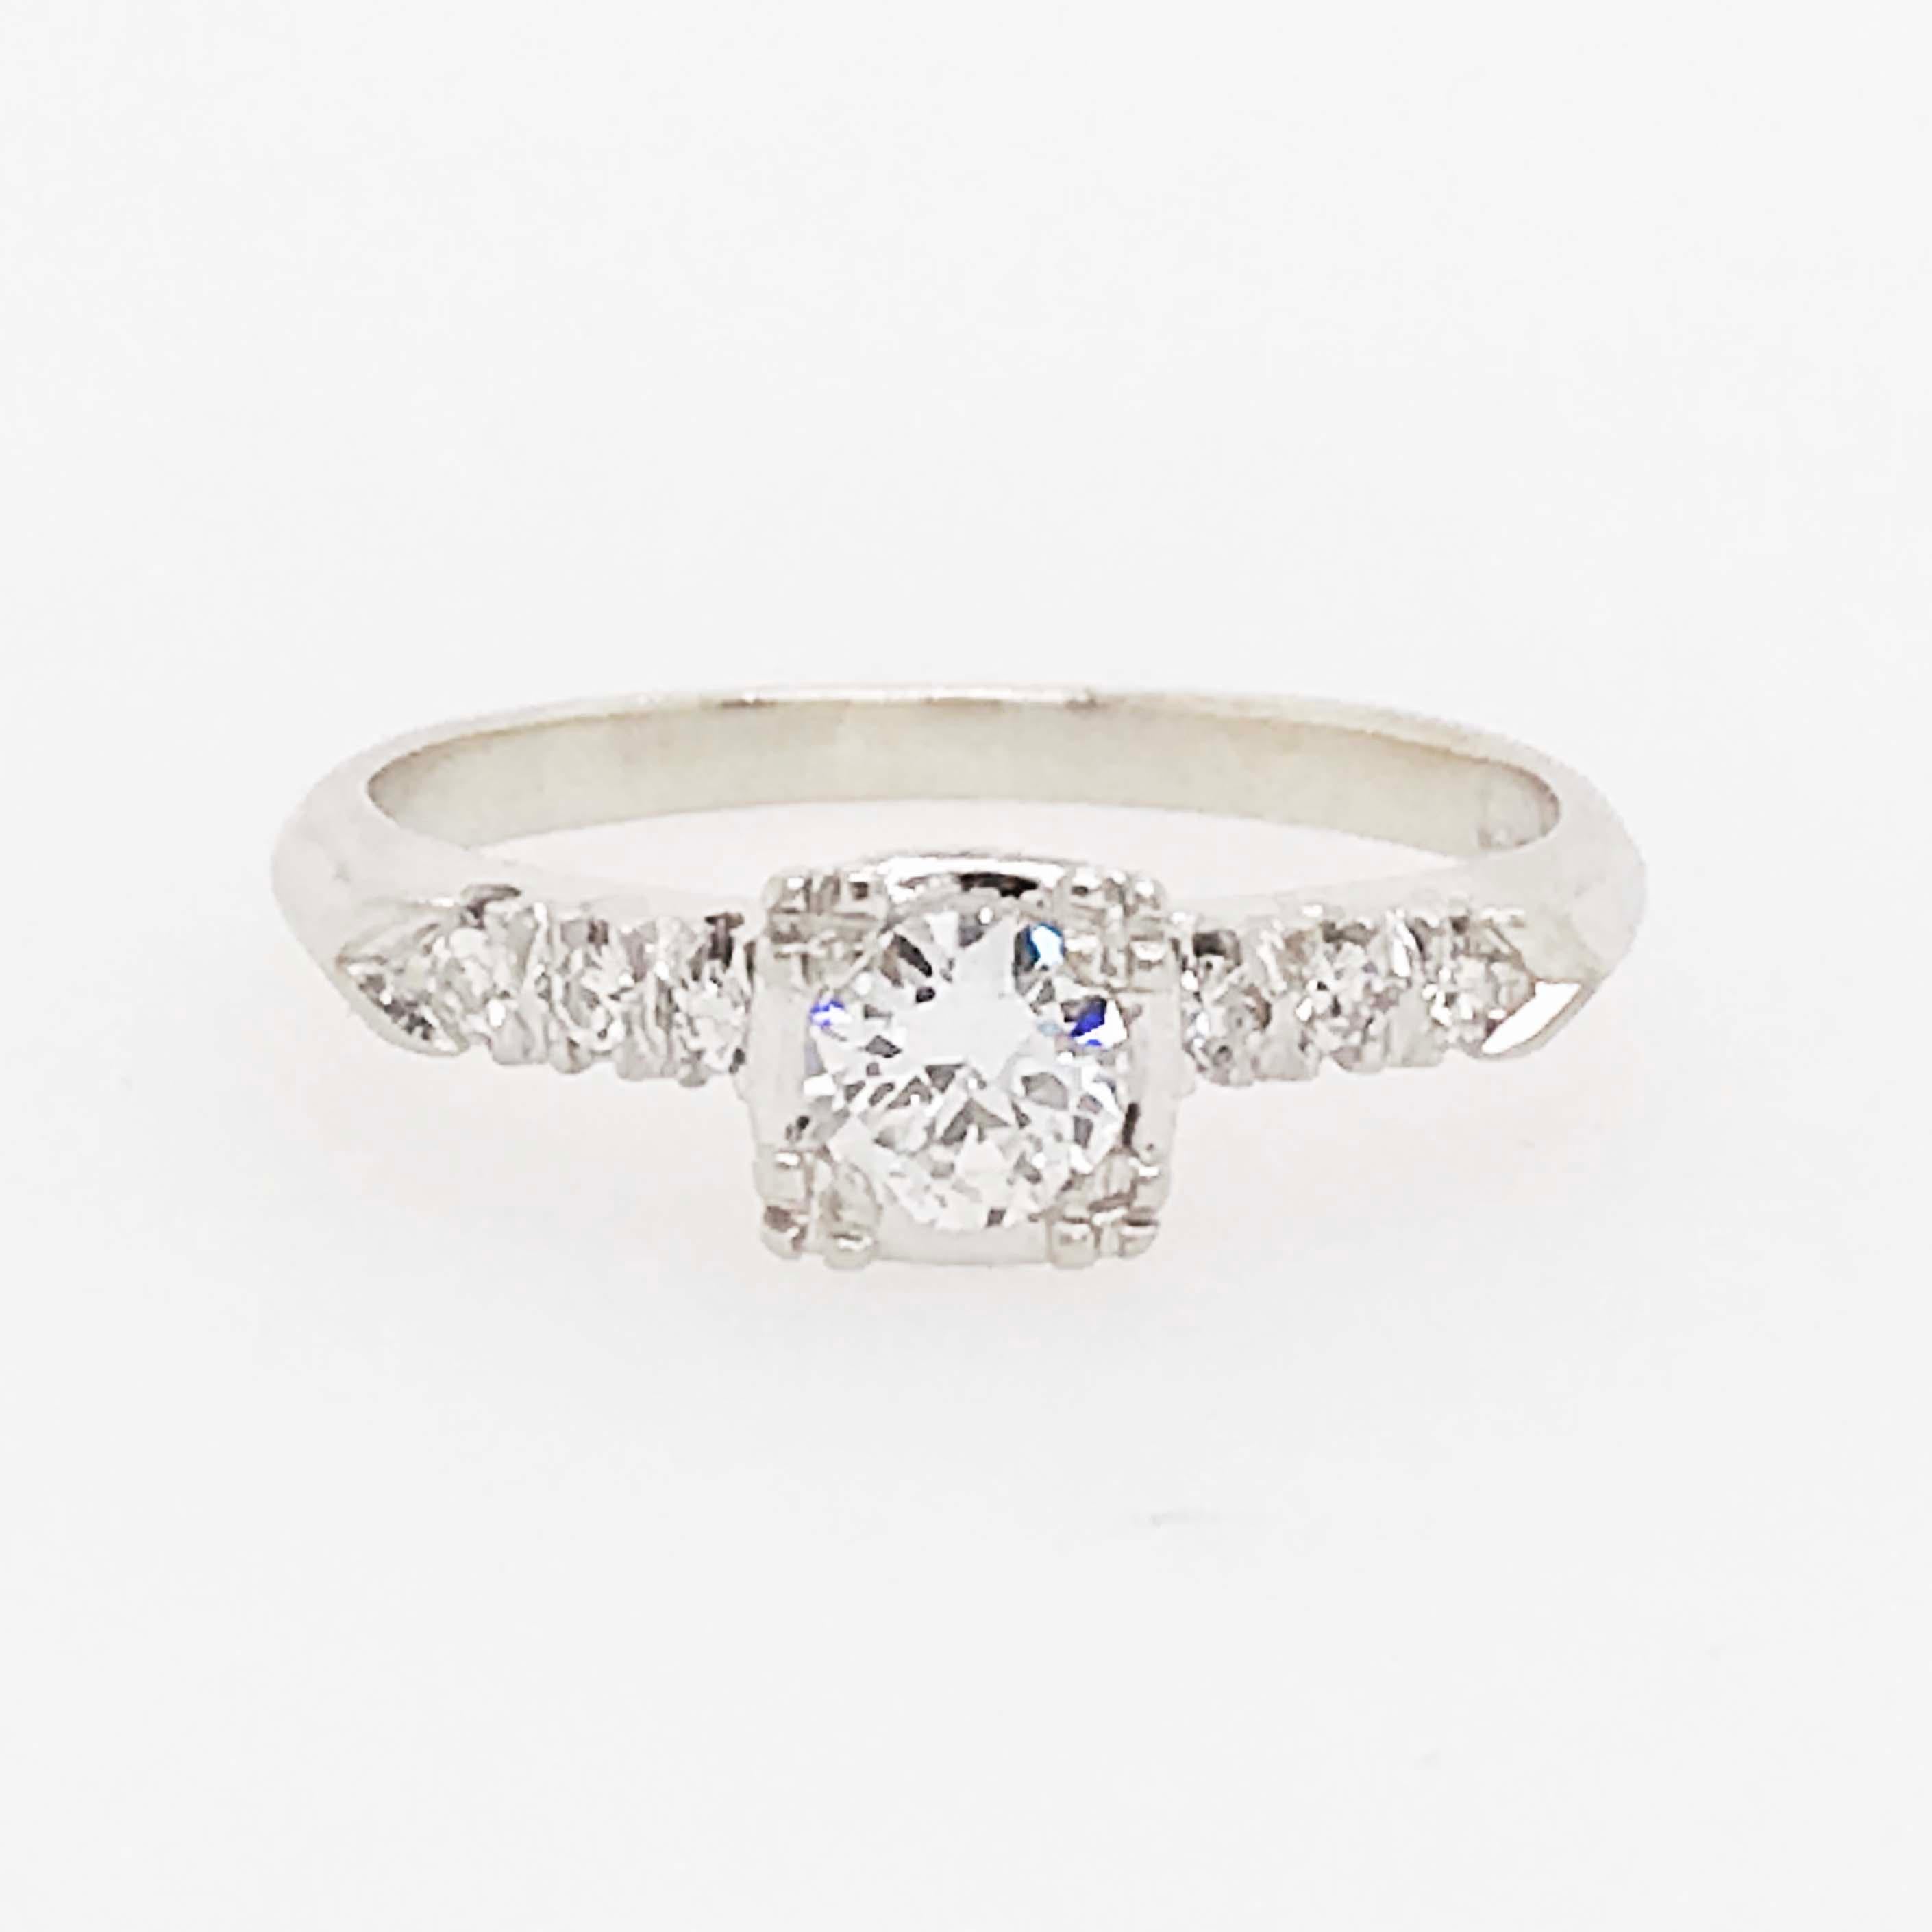 This is a very special estate diamond engagement ring. With all of the original diamonds set in the original platinum setting! Set in the center of this estate engagement ring is an Old European cut diamond! 
The Old European cut diamonds are round